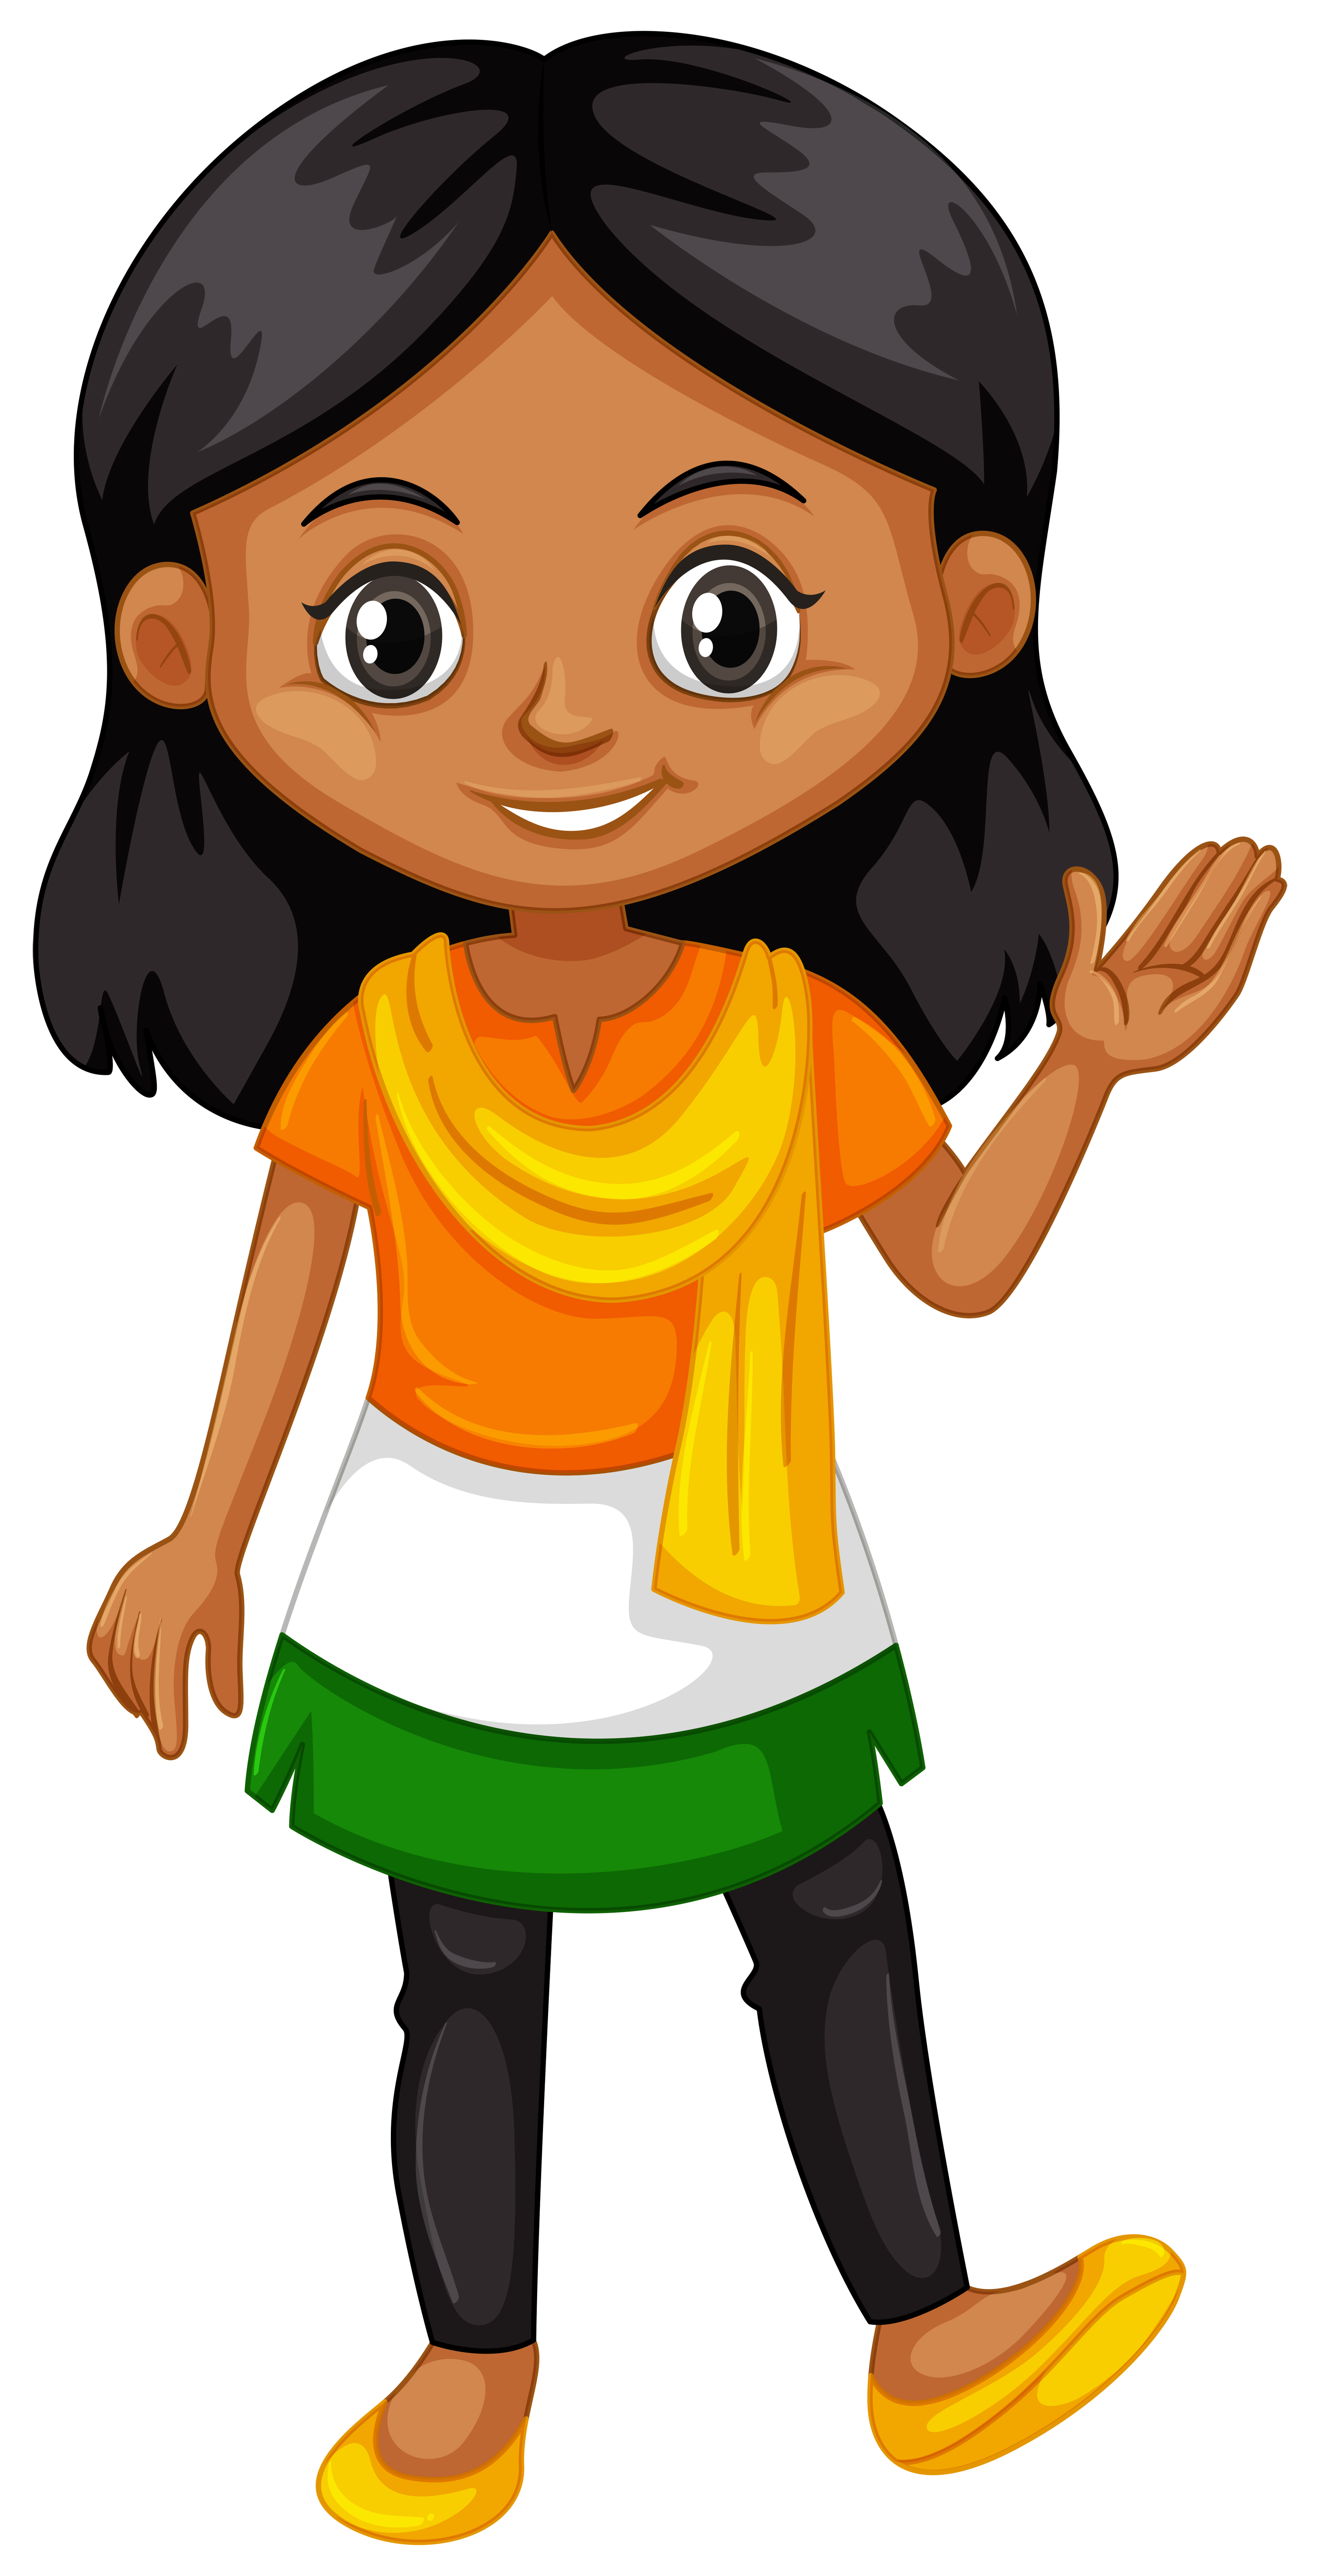 Download Indian girl wearing shirt with color of the flag 294779 - Download Free Vectors, Clipart ...